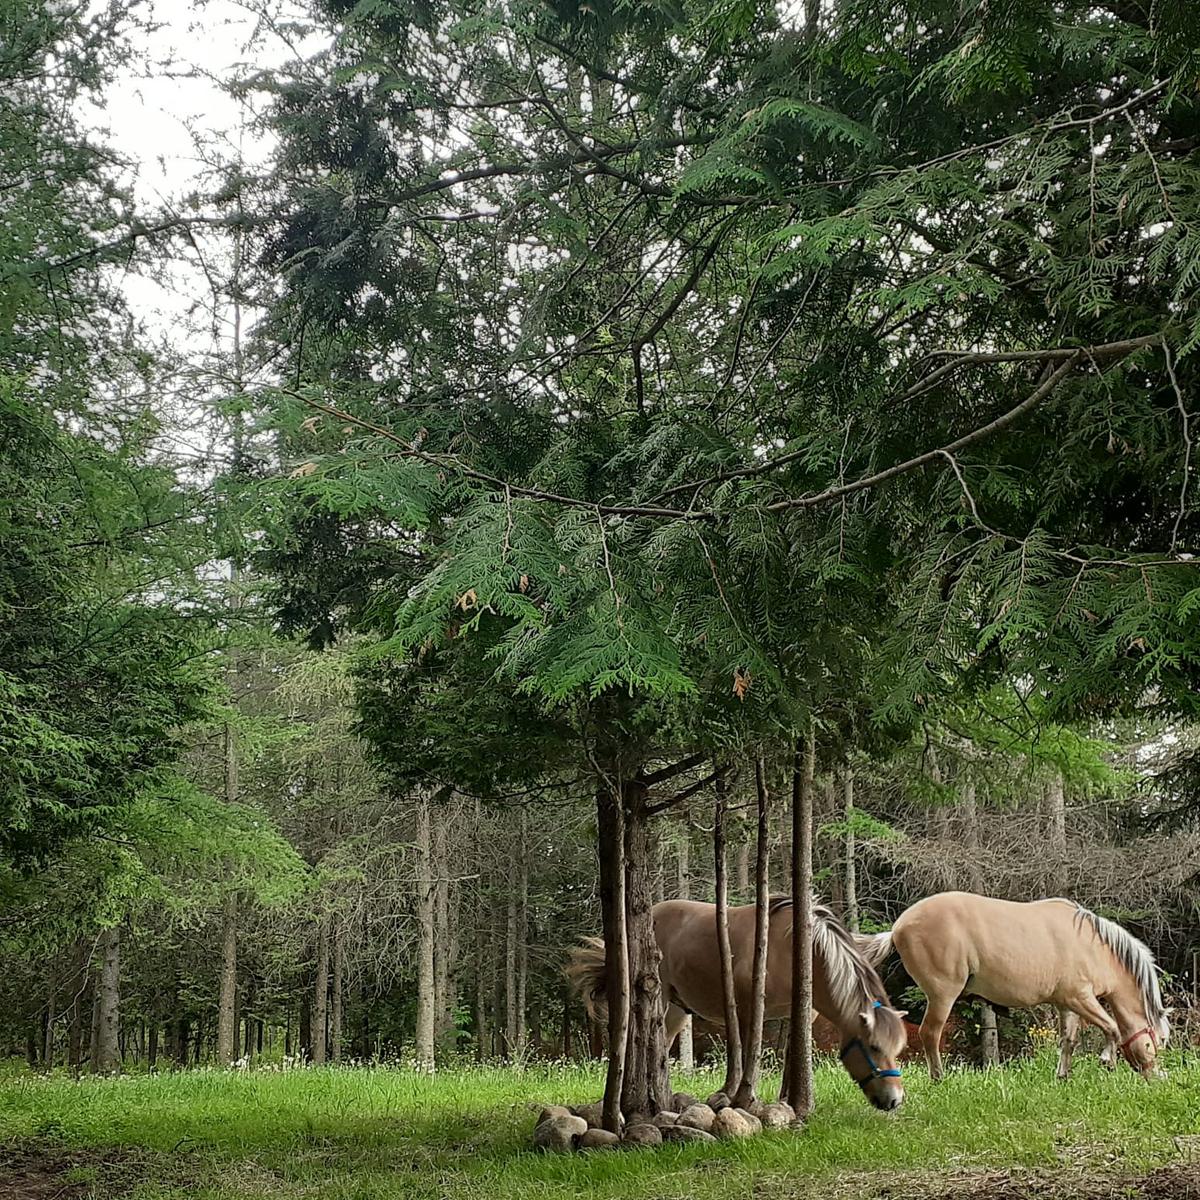 Norweigan fjord horses in the forest. (SWNS)